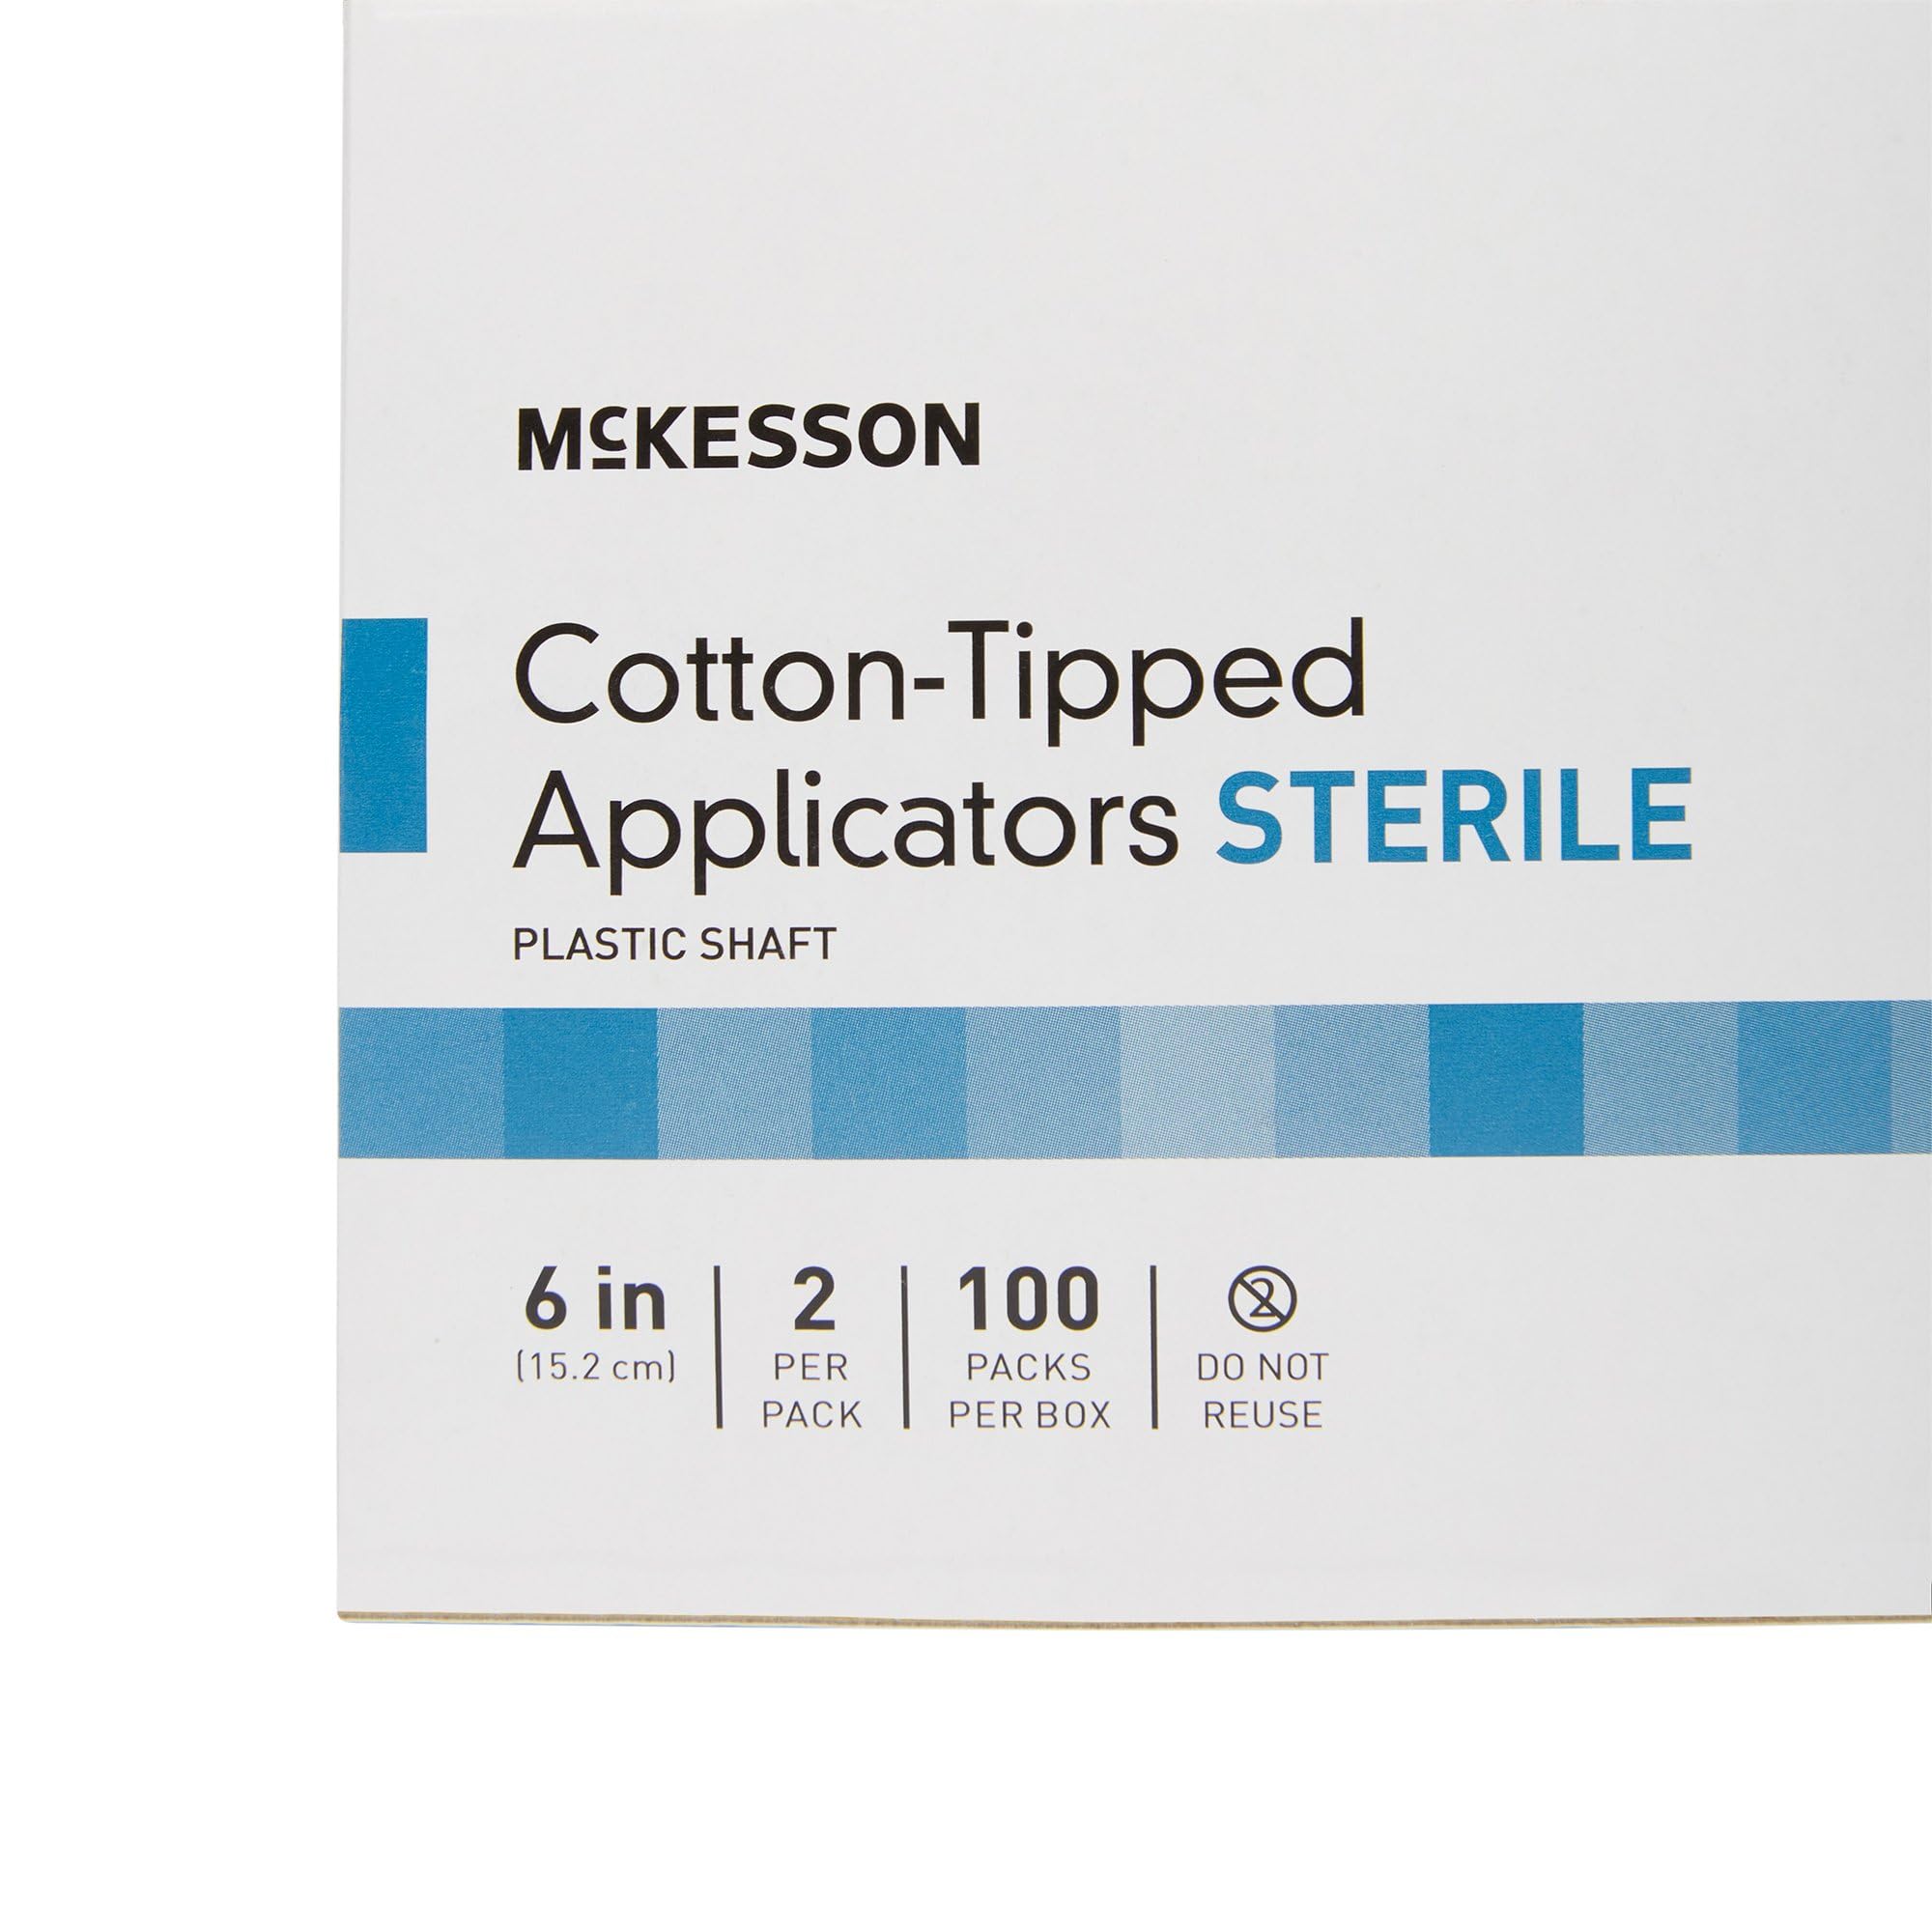 McKesson Cotton Tipped Swabs, Sterile, Individually Wrapped 2-Packs, Plastic Handle Applicator Swabsticks, 6 in, 2 Count, 100 Packs, 200 Total